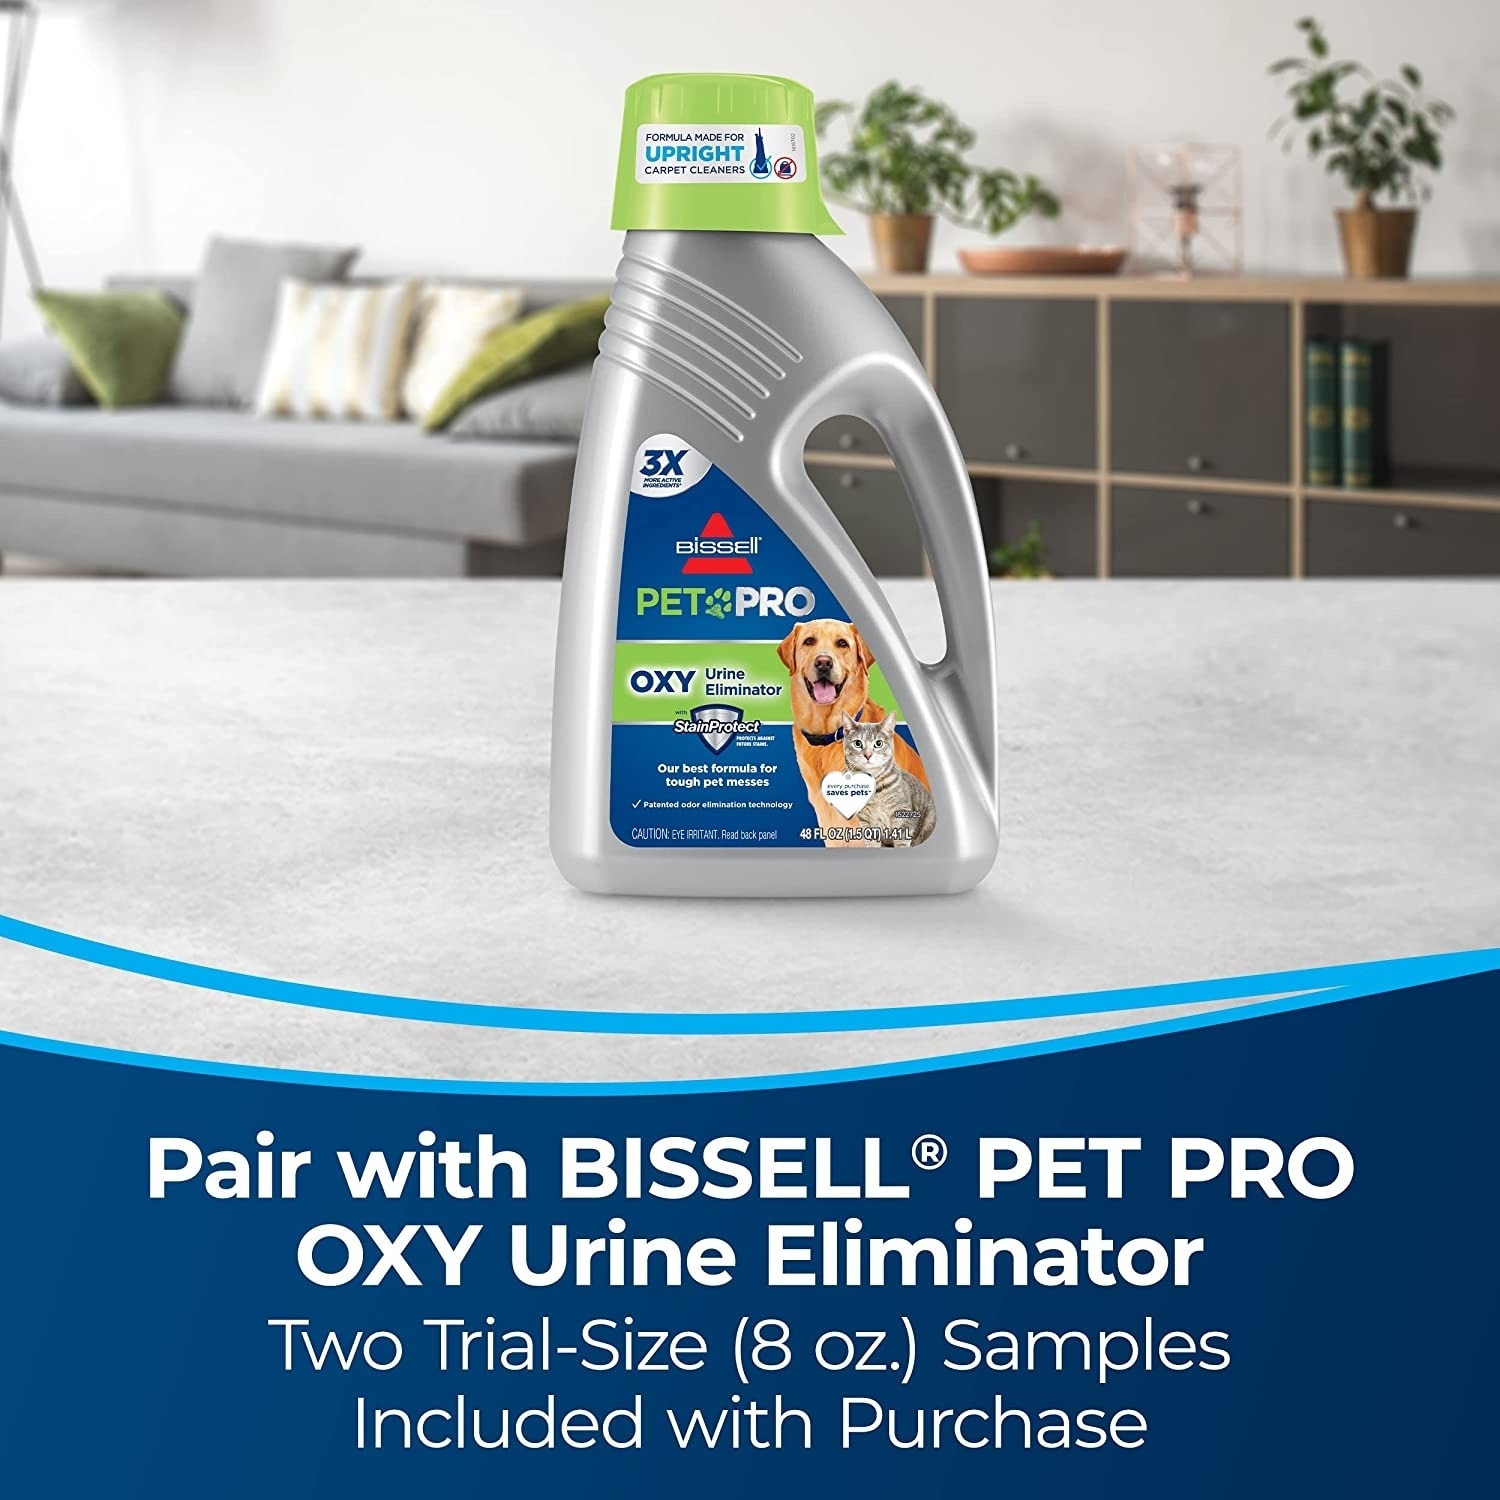 BISSELL SpotClean Pet Pro Portable Carpet Cleaner - Bed Bath & Beyond -  37517881